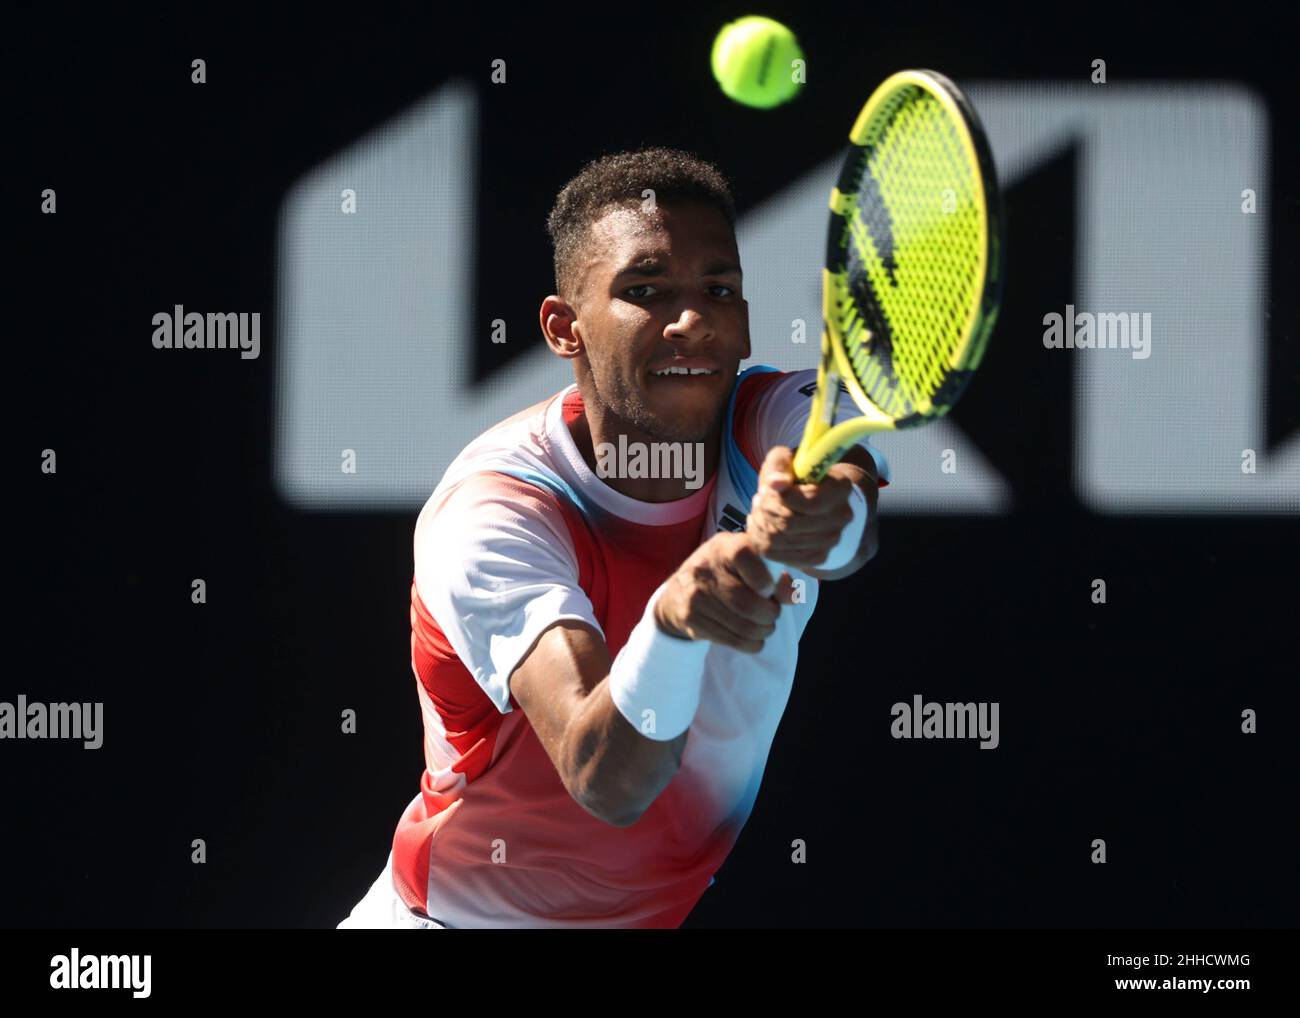 Melbourne, Australia. 24th. Jan., 2022. Canadian tennis player Felix Auger- Aliassime in action during the Australian Open tournament at Melbourne Park  on Monday 24 January 2022. © Juergen Hasenkopf / Alamy Live News Stock  Photo - Alamy